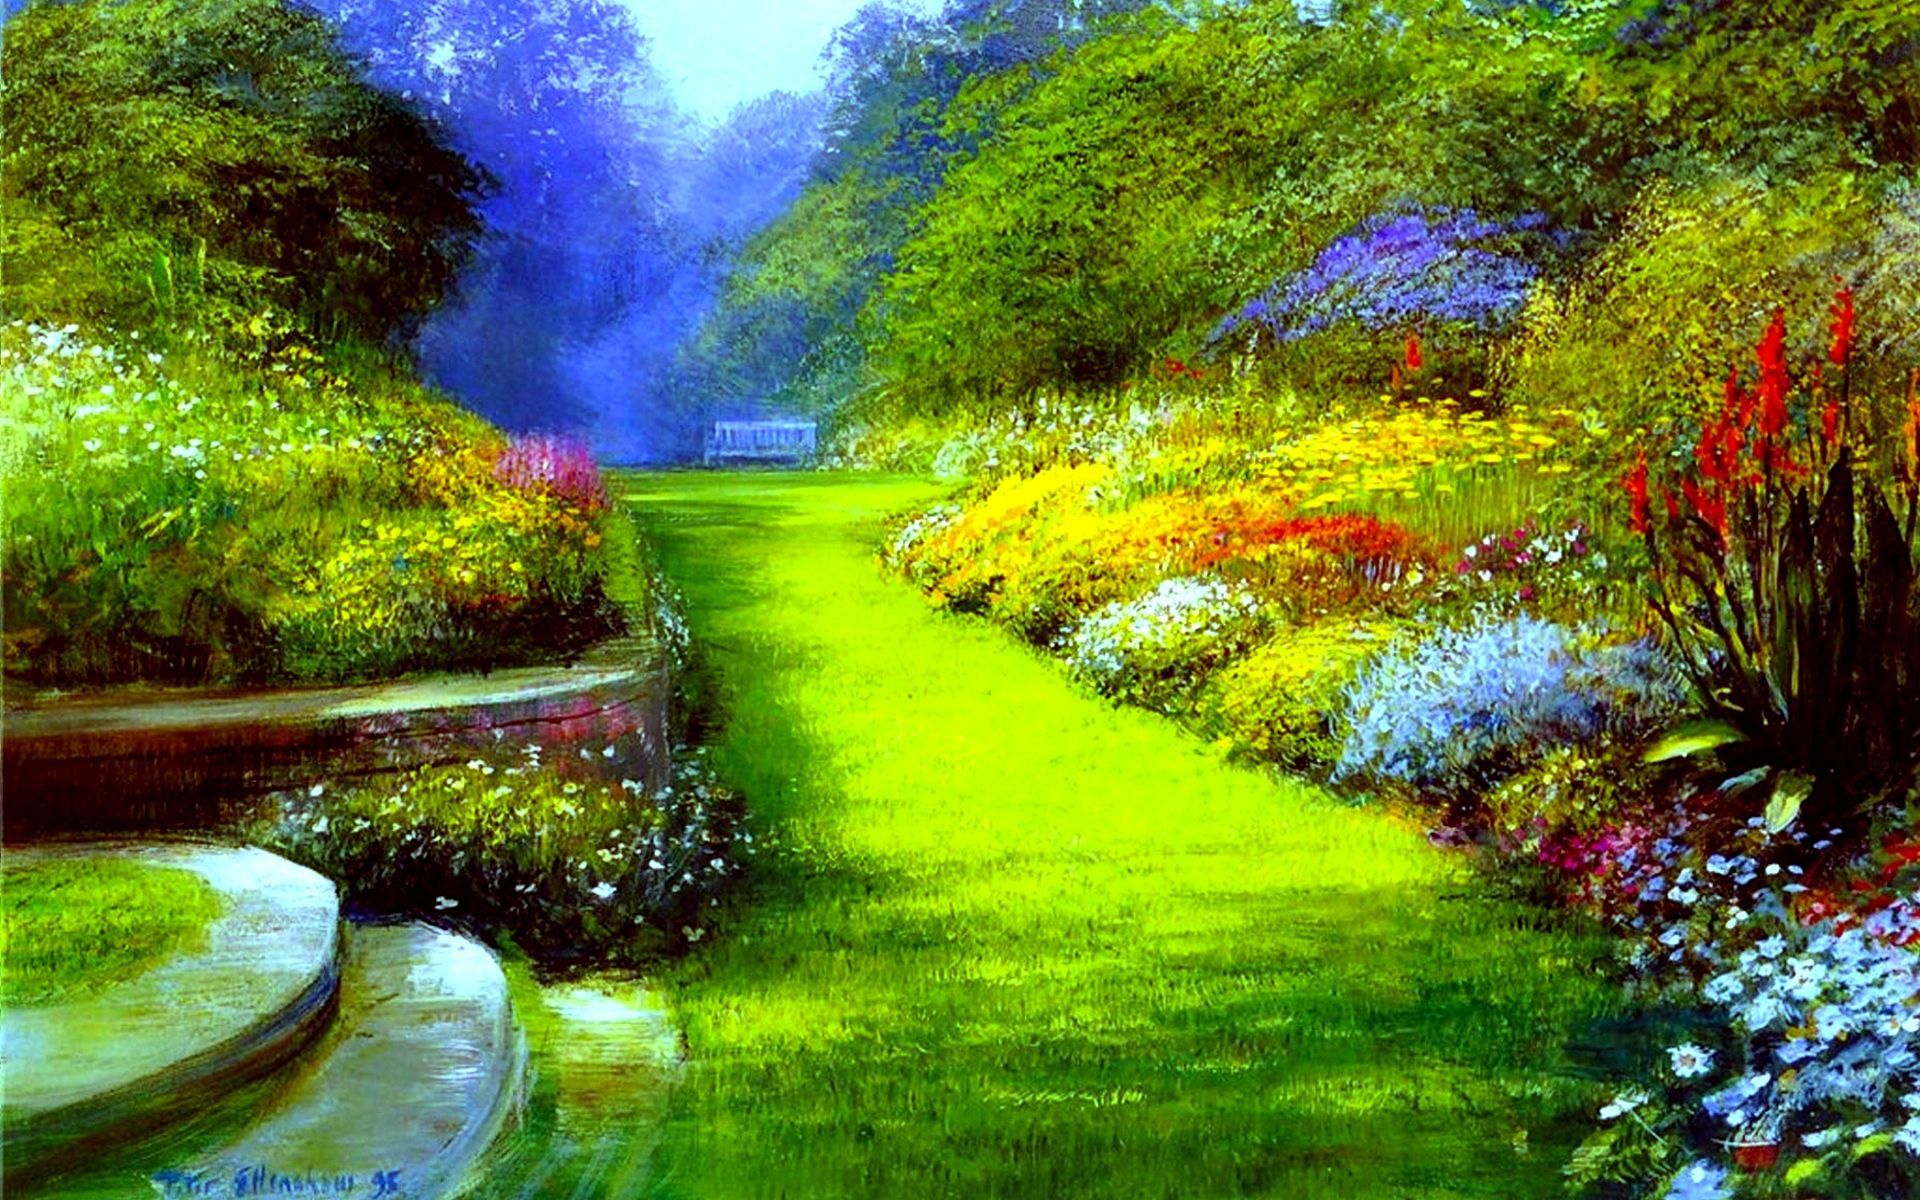 Beautiful Park In The Summer 5917  Wallpapers13com